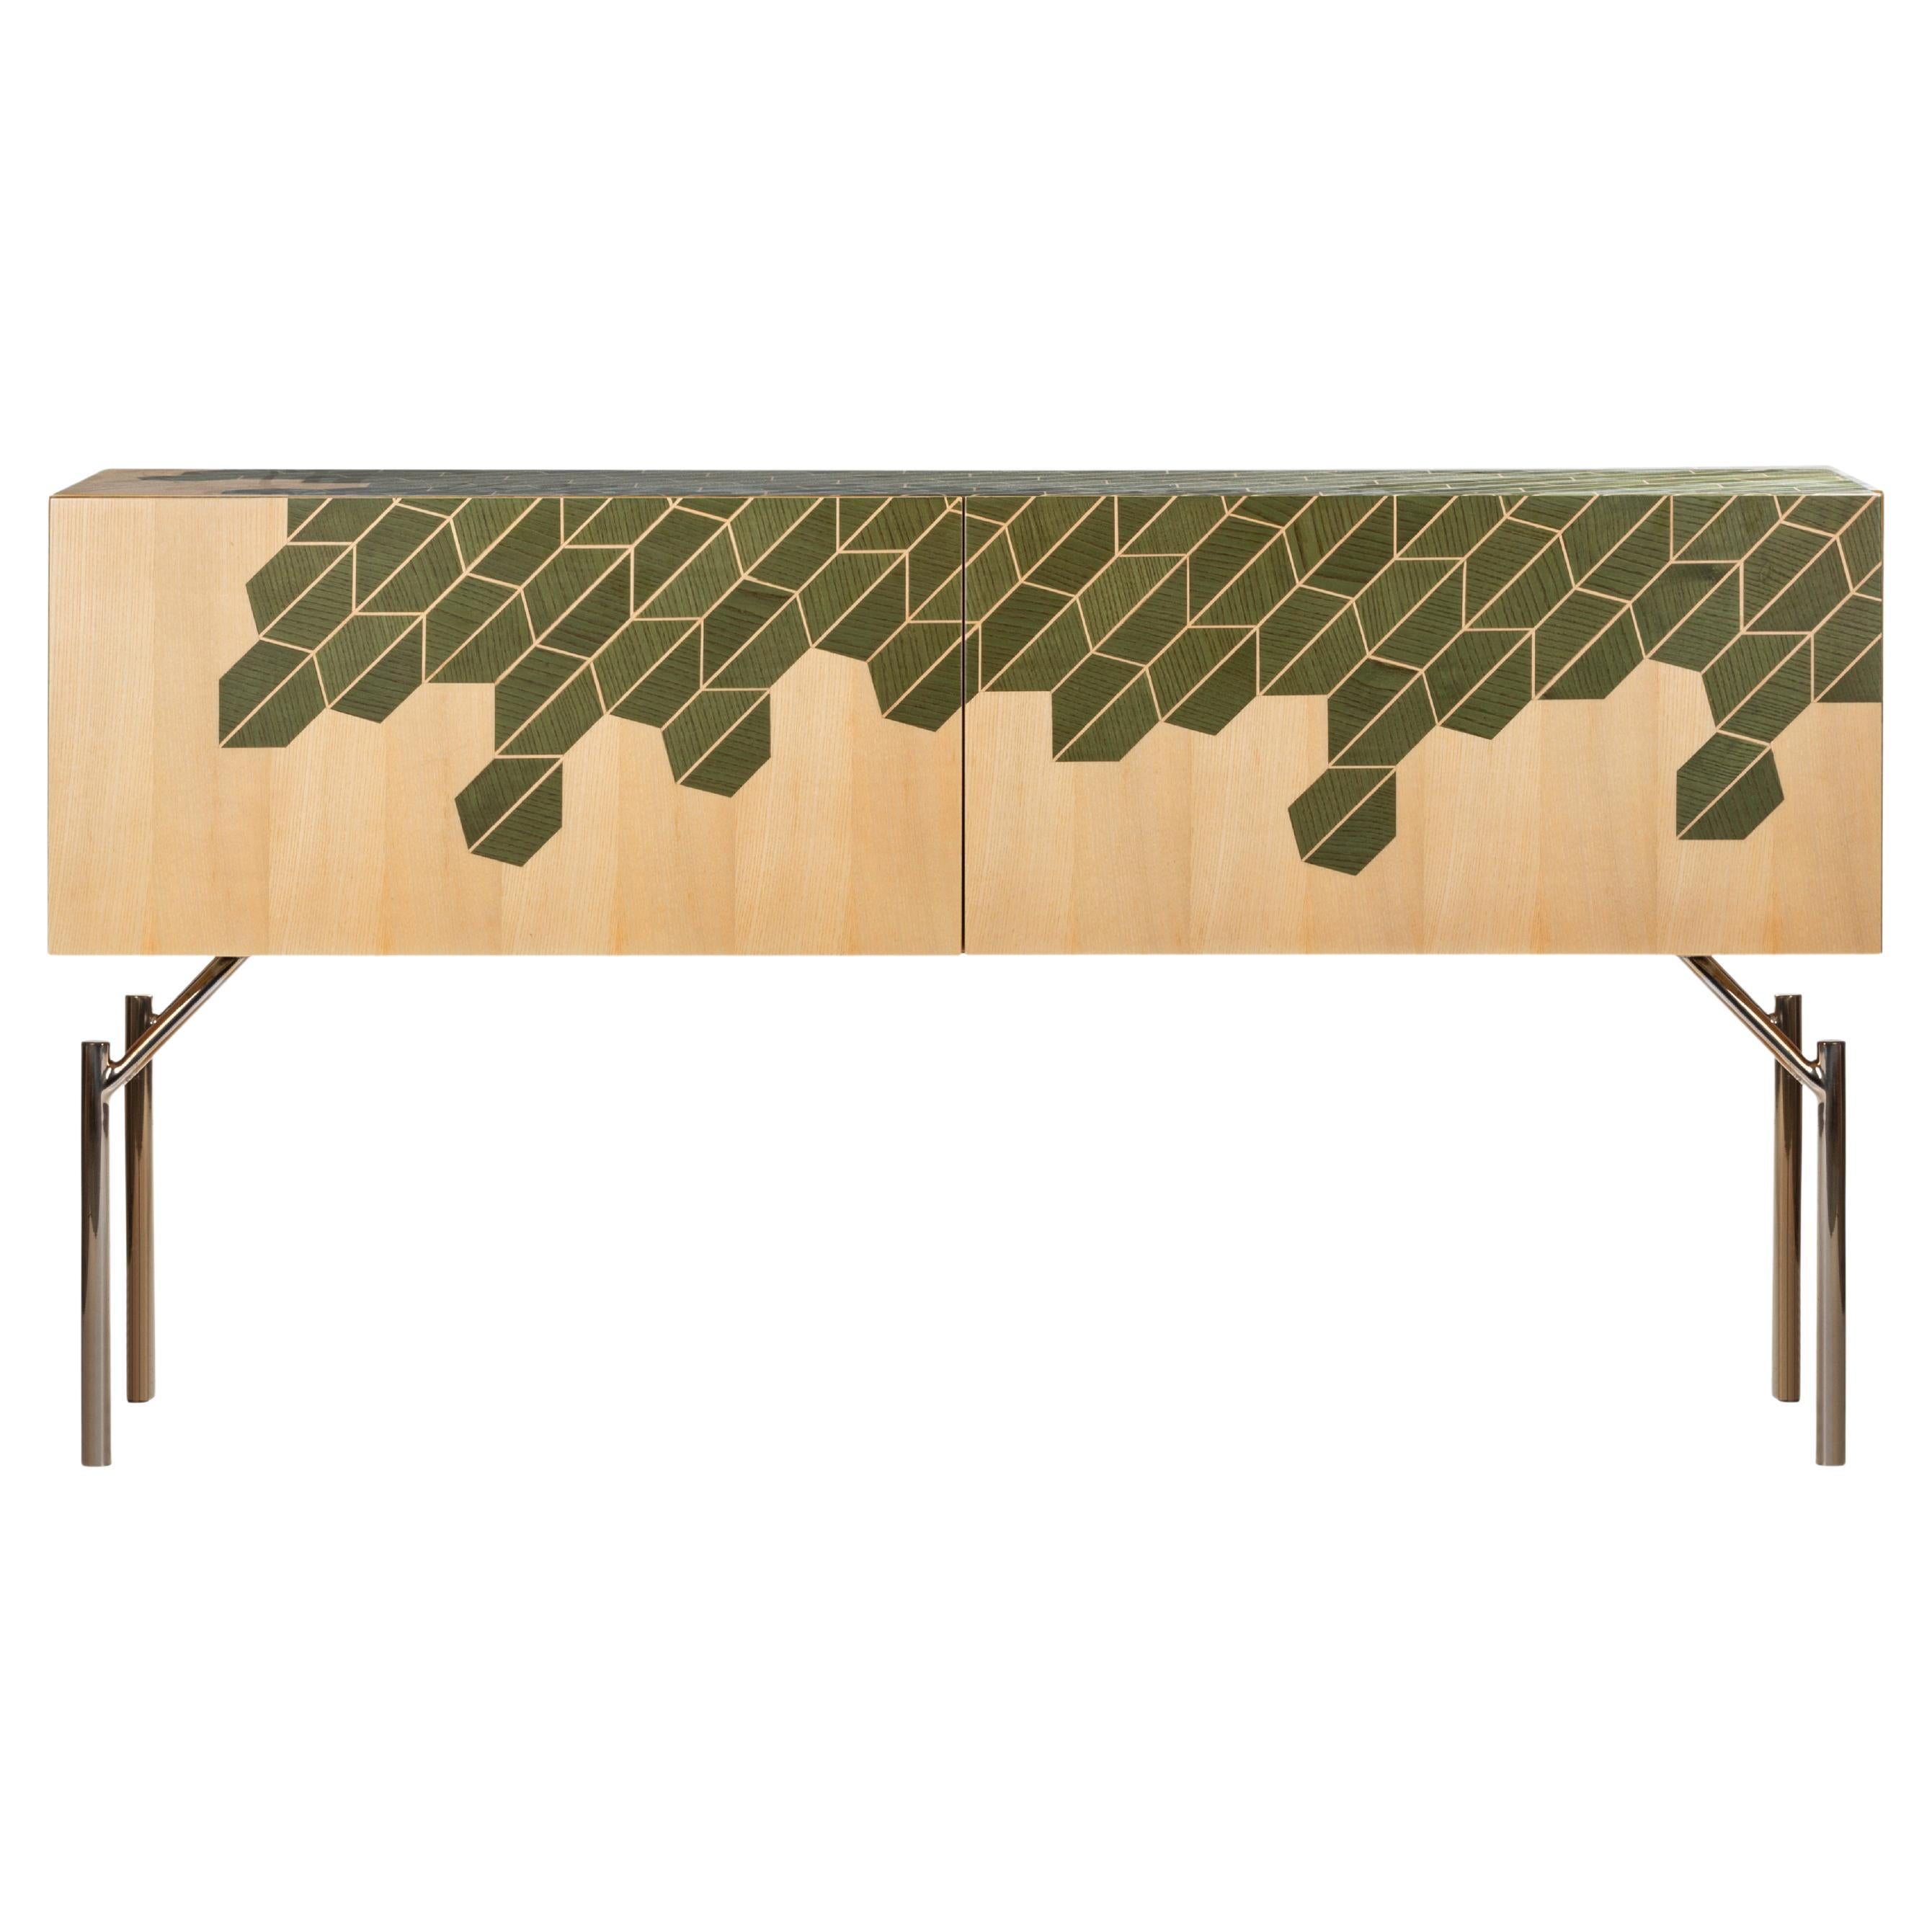 21st Century Primavera Inlaid Sideboard 45° Cut in Ash and Steel, Made in Italy